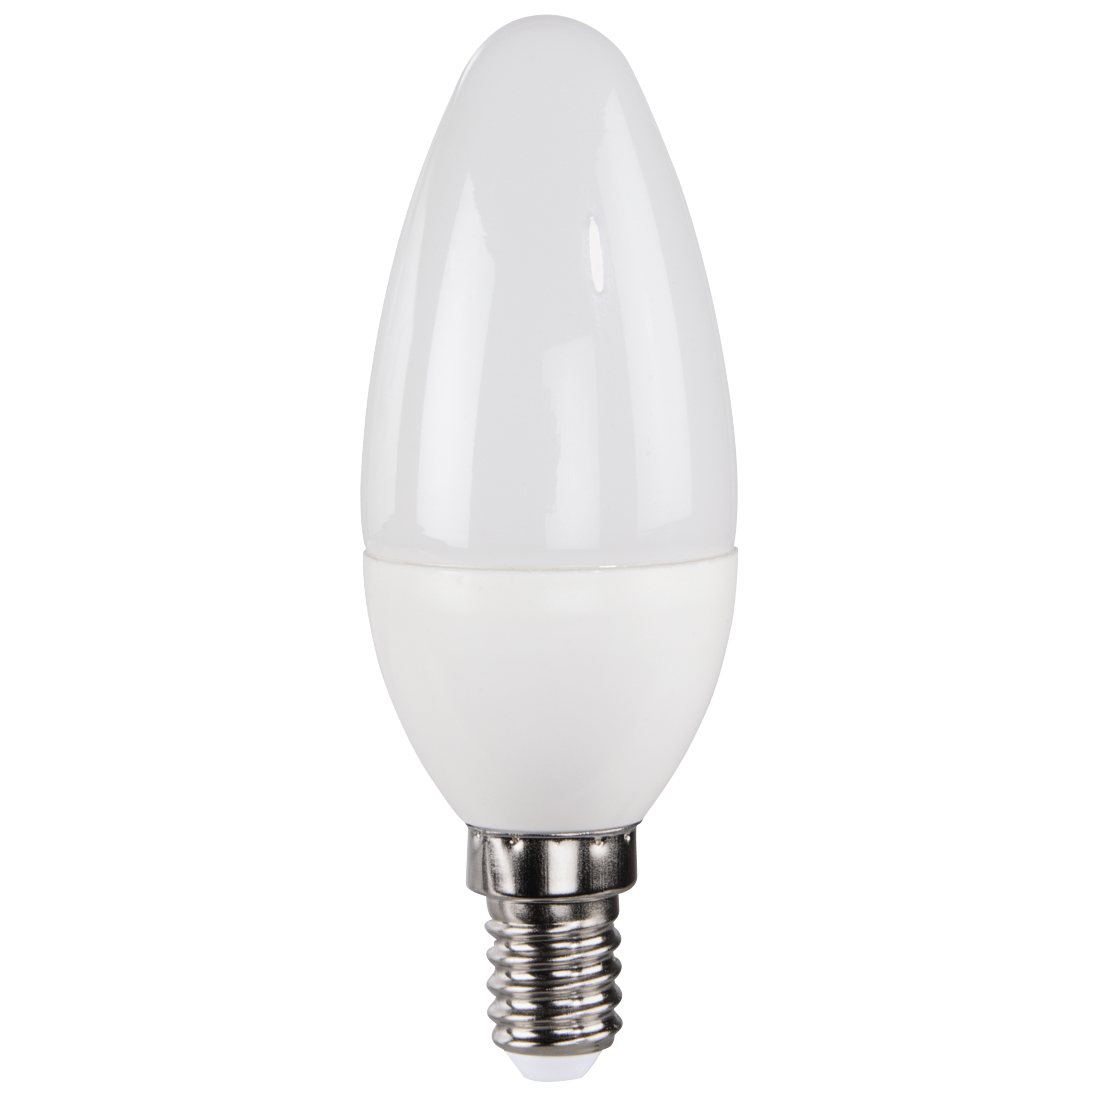 abx High-Res Image - Xavax, LED Bulb, E14, 350lm Replaces 32W, Candle Bulb, warm white